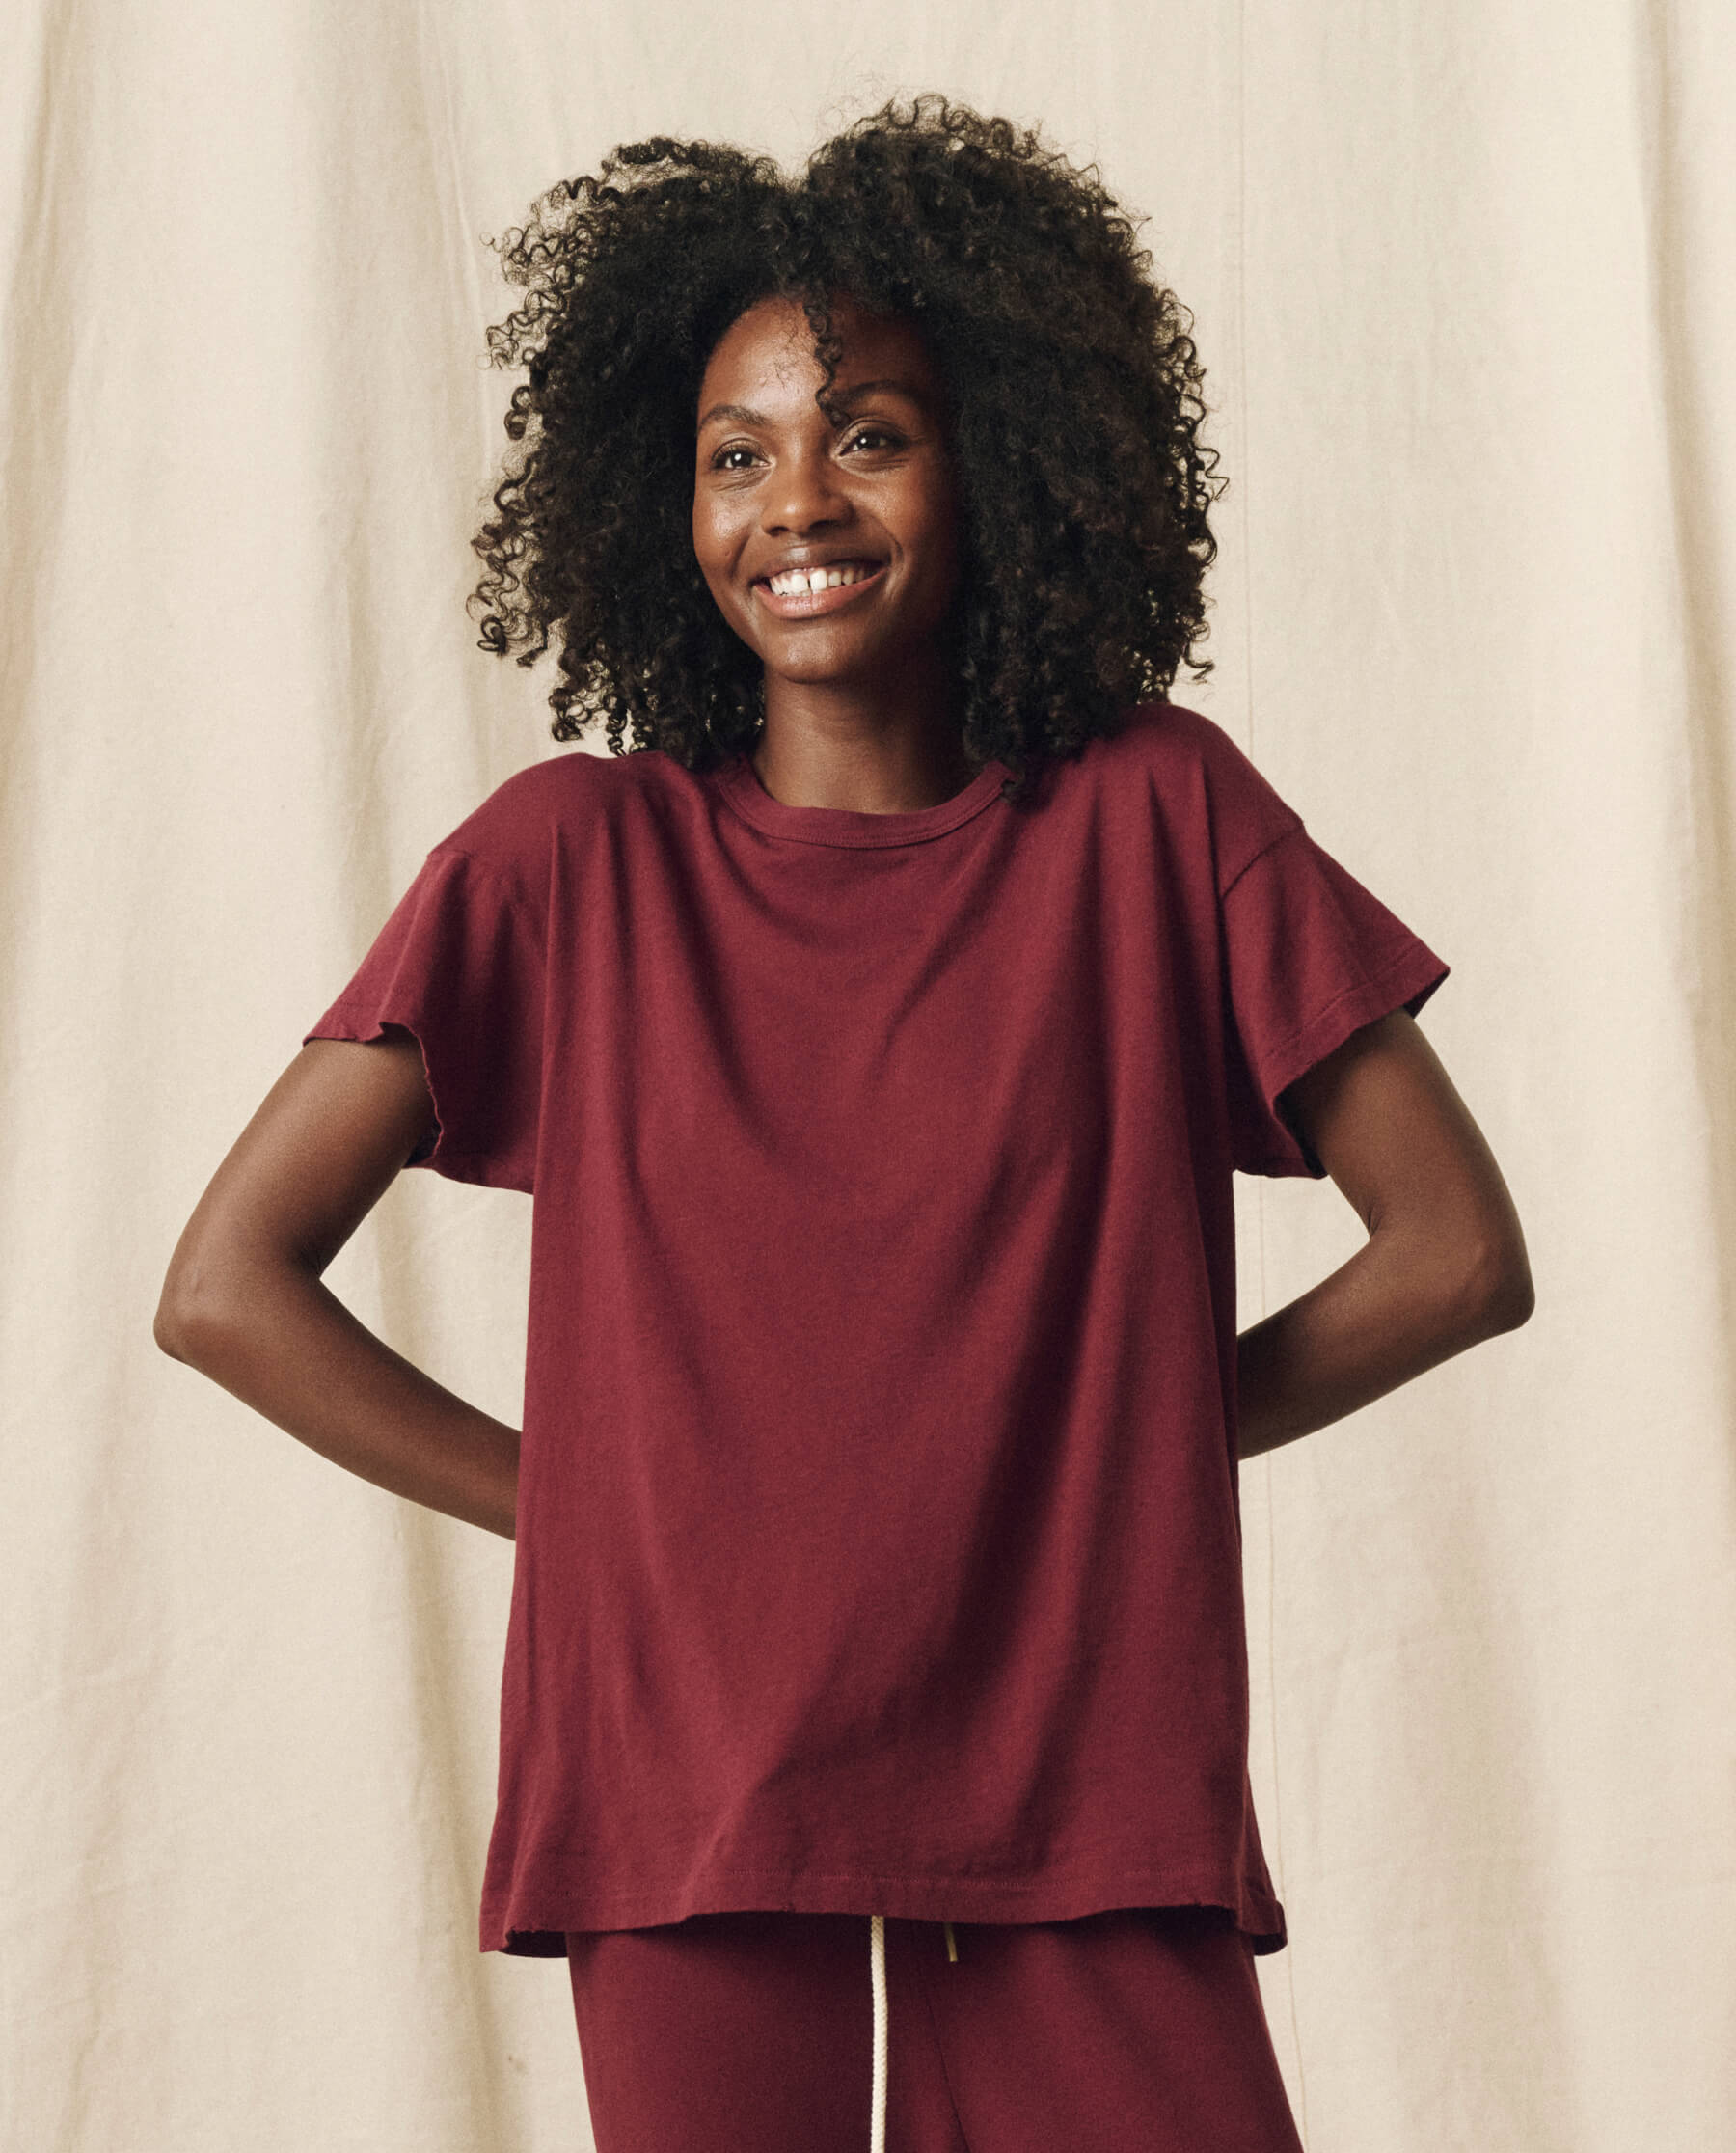 The Boxy Crew. Solid -- Mulled Wine TEES THE GREAT. HOL 23 KNITS